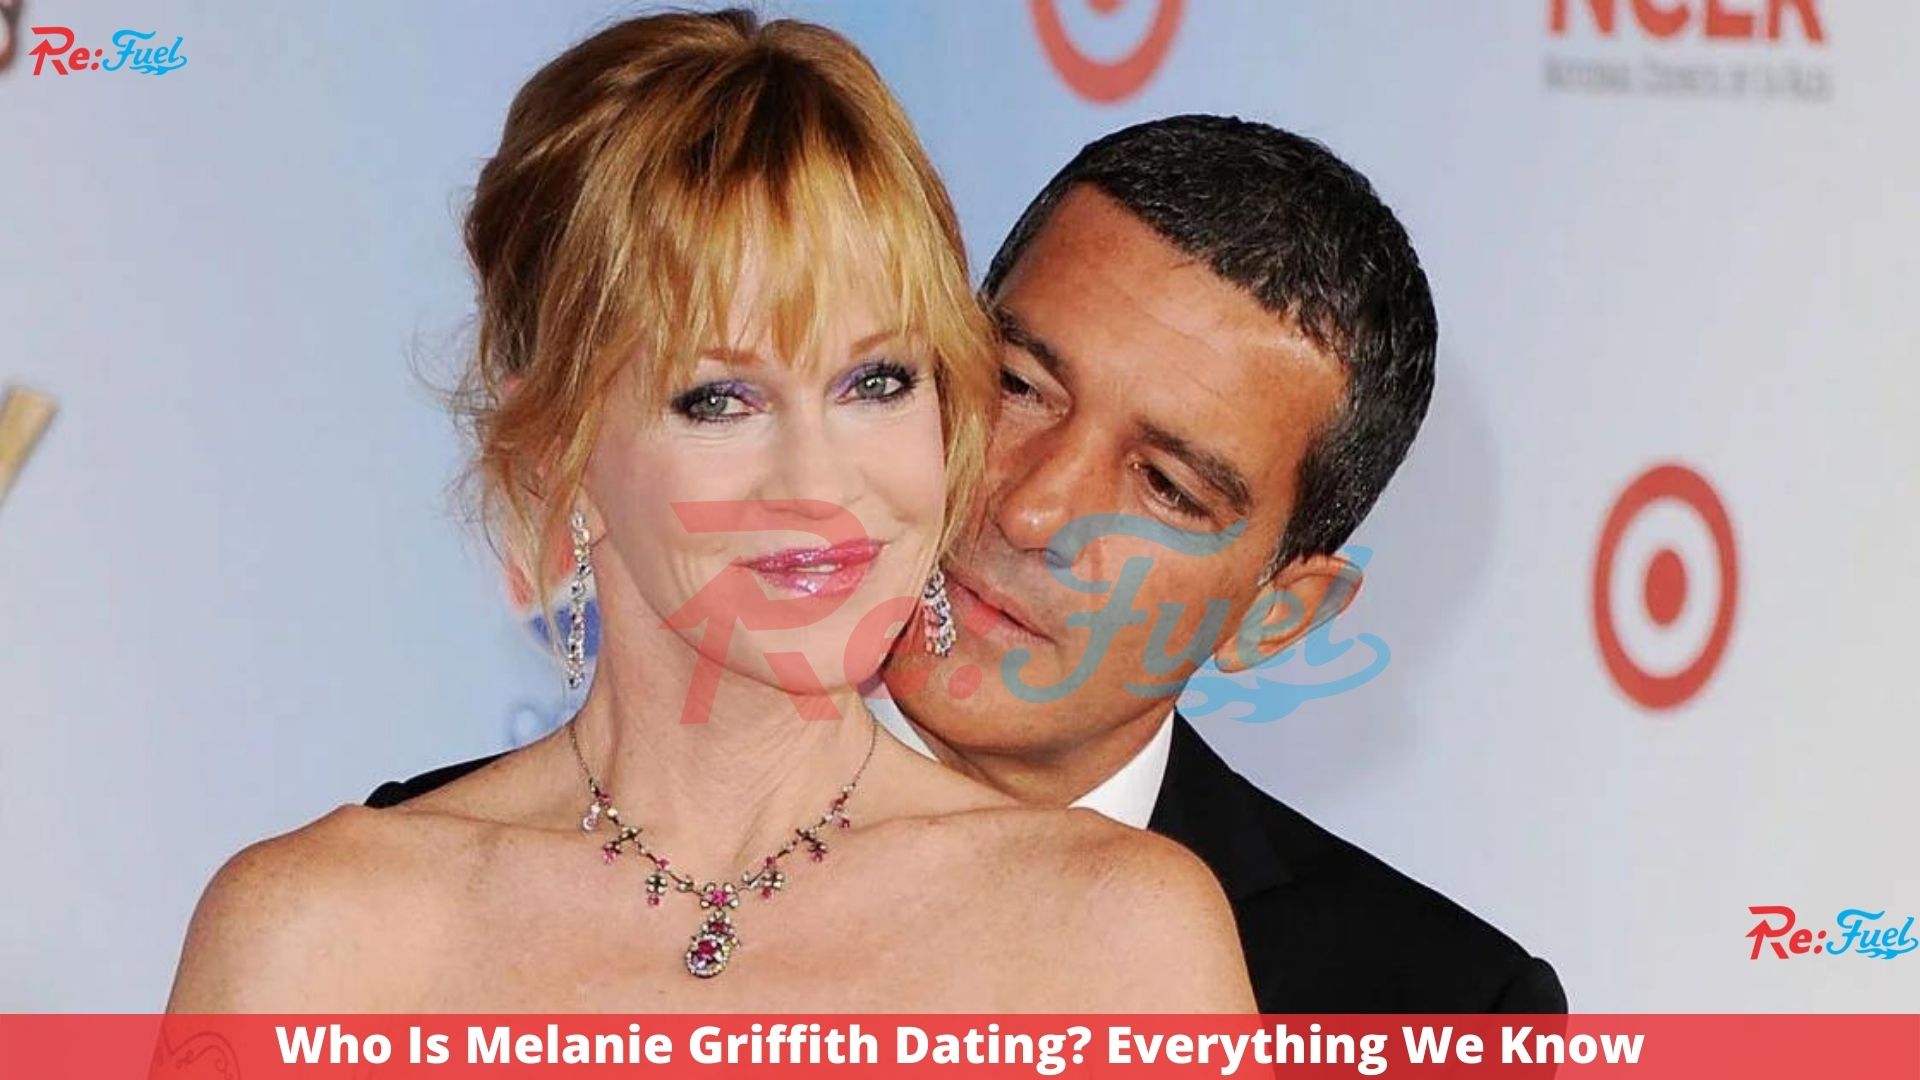 Who Is Melanie Griffith Dating? Everything We Know